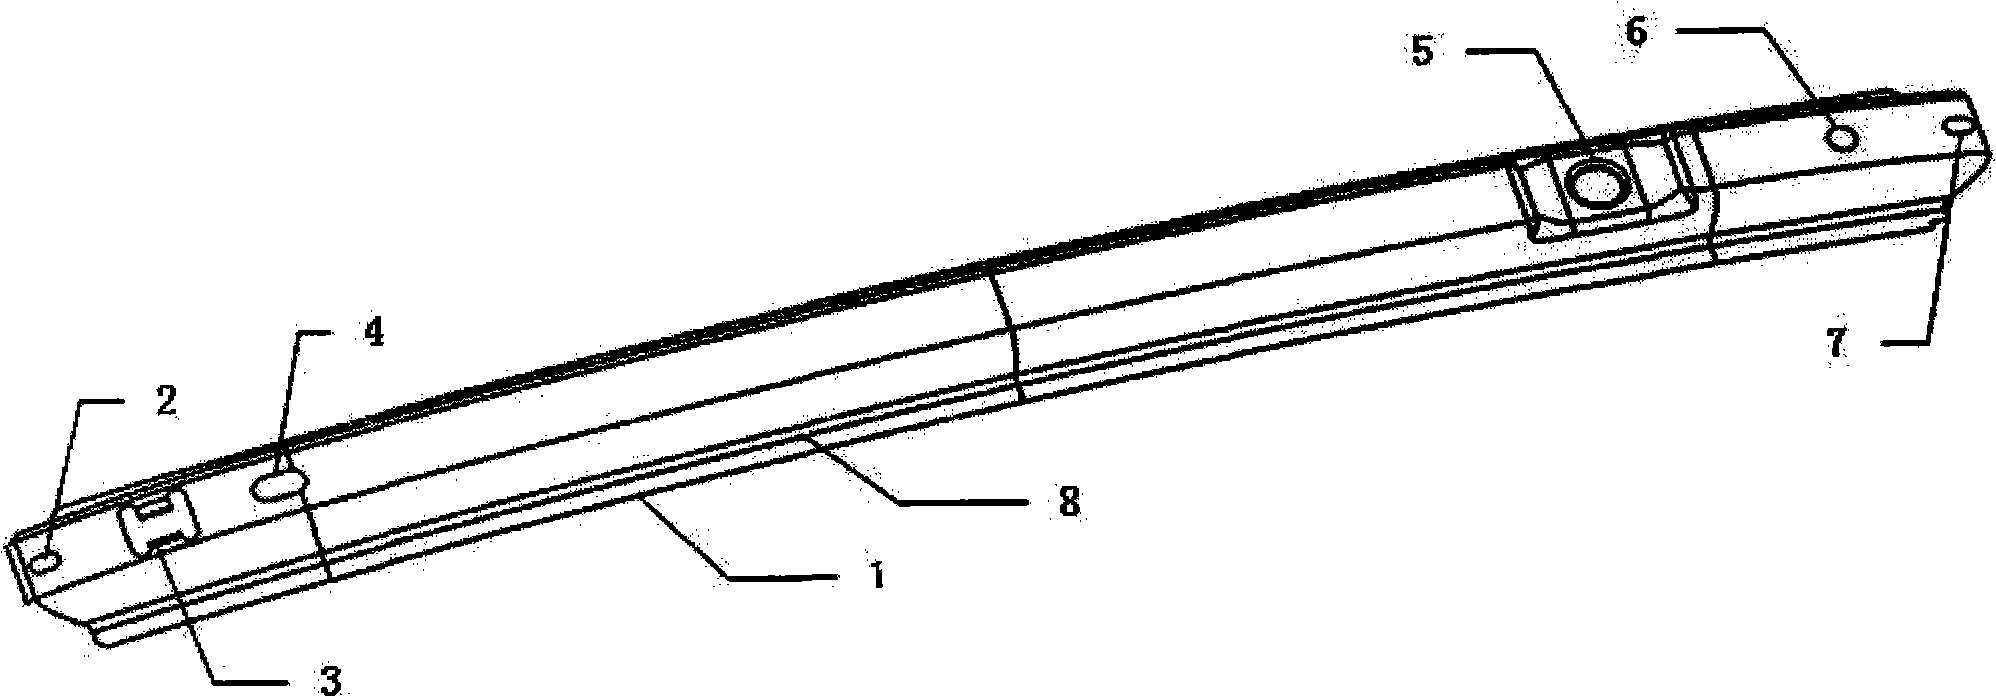 Stamping method for using high-strength steel plate to manufacture automobile rear bumper steel girder